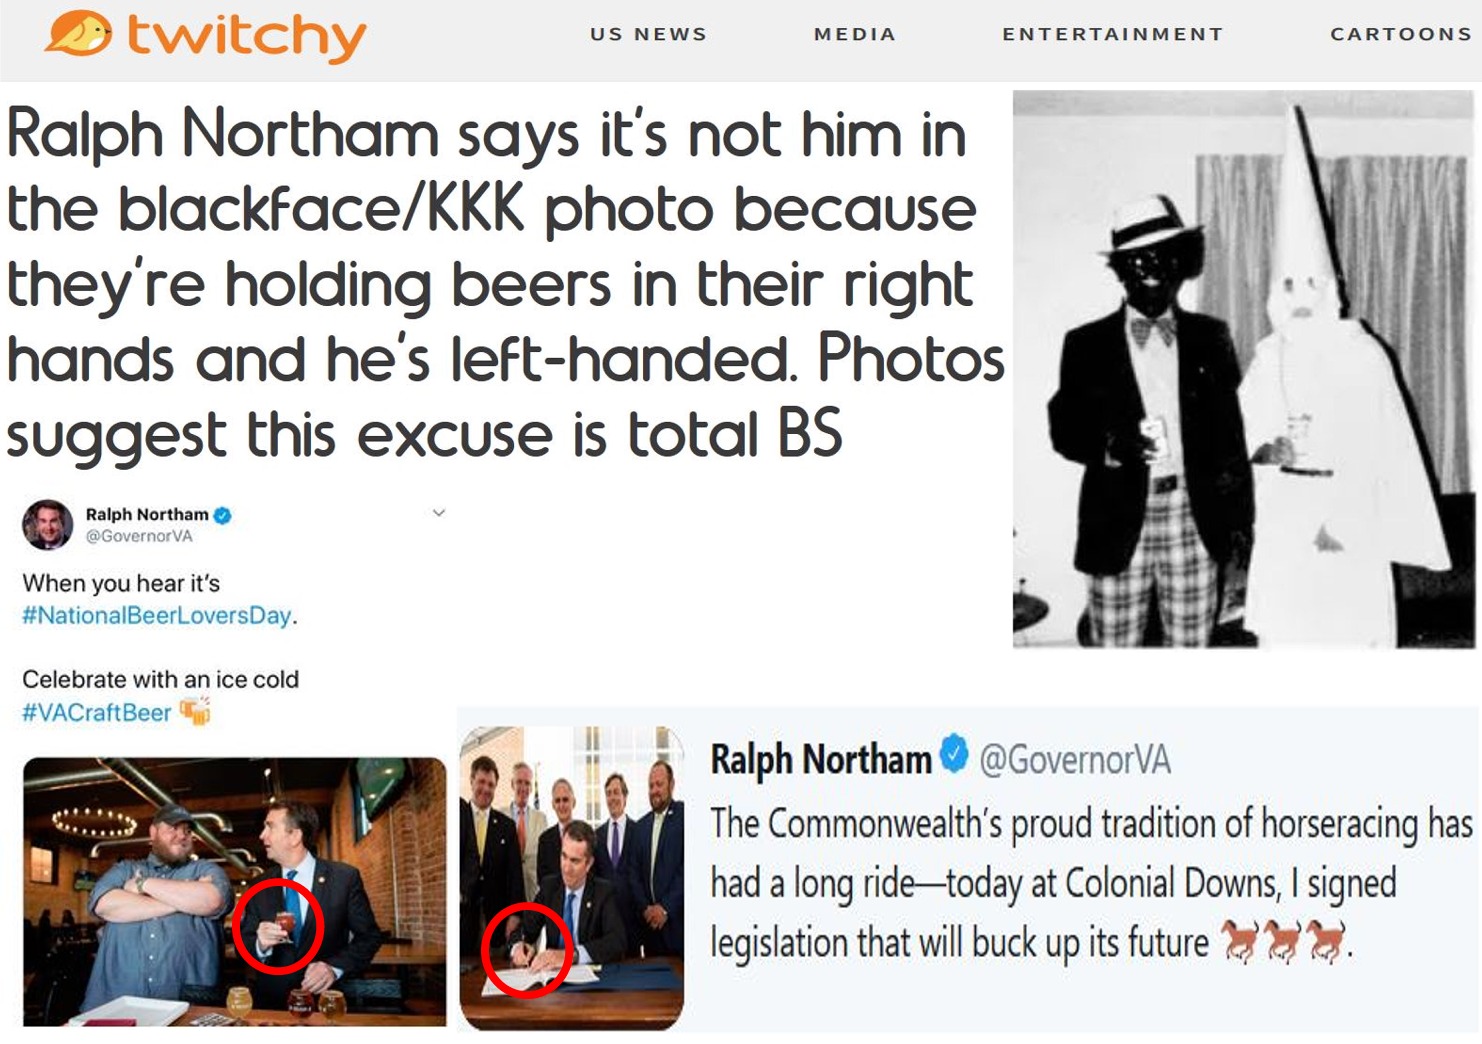 memes - media - Us News Us News Media Entertainment Cartoons twitchy Ralph Northam says it's not him in the blackfaceKkk photo because they're holding beers in their right hands and he's lefthanded. Photos suggest this excuse is total Bs Ralph Northam Whe